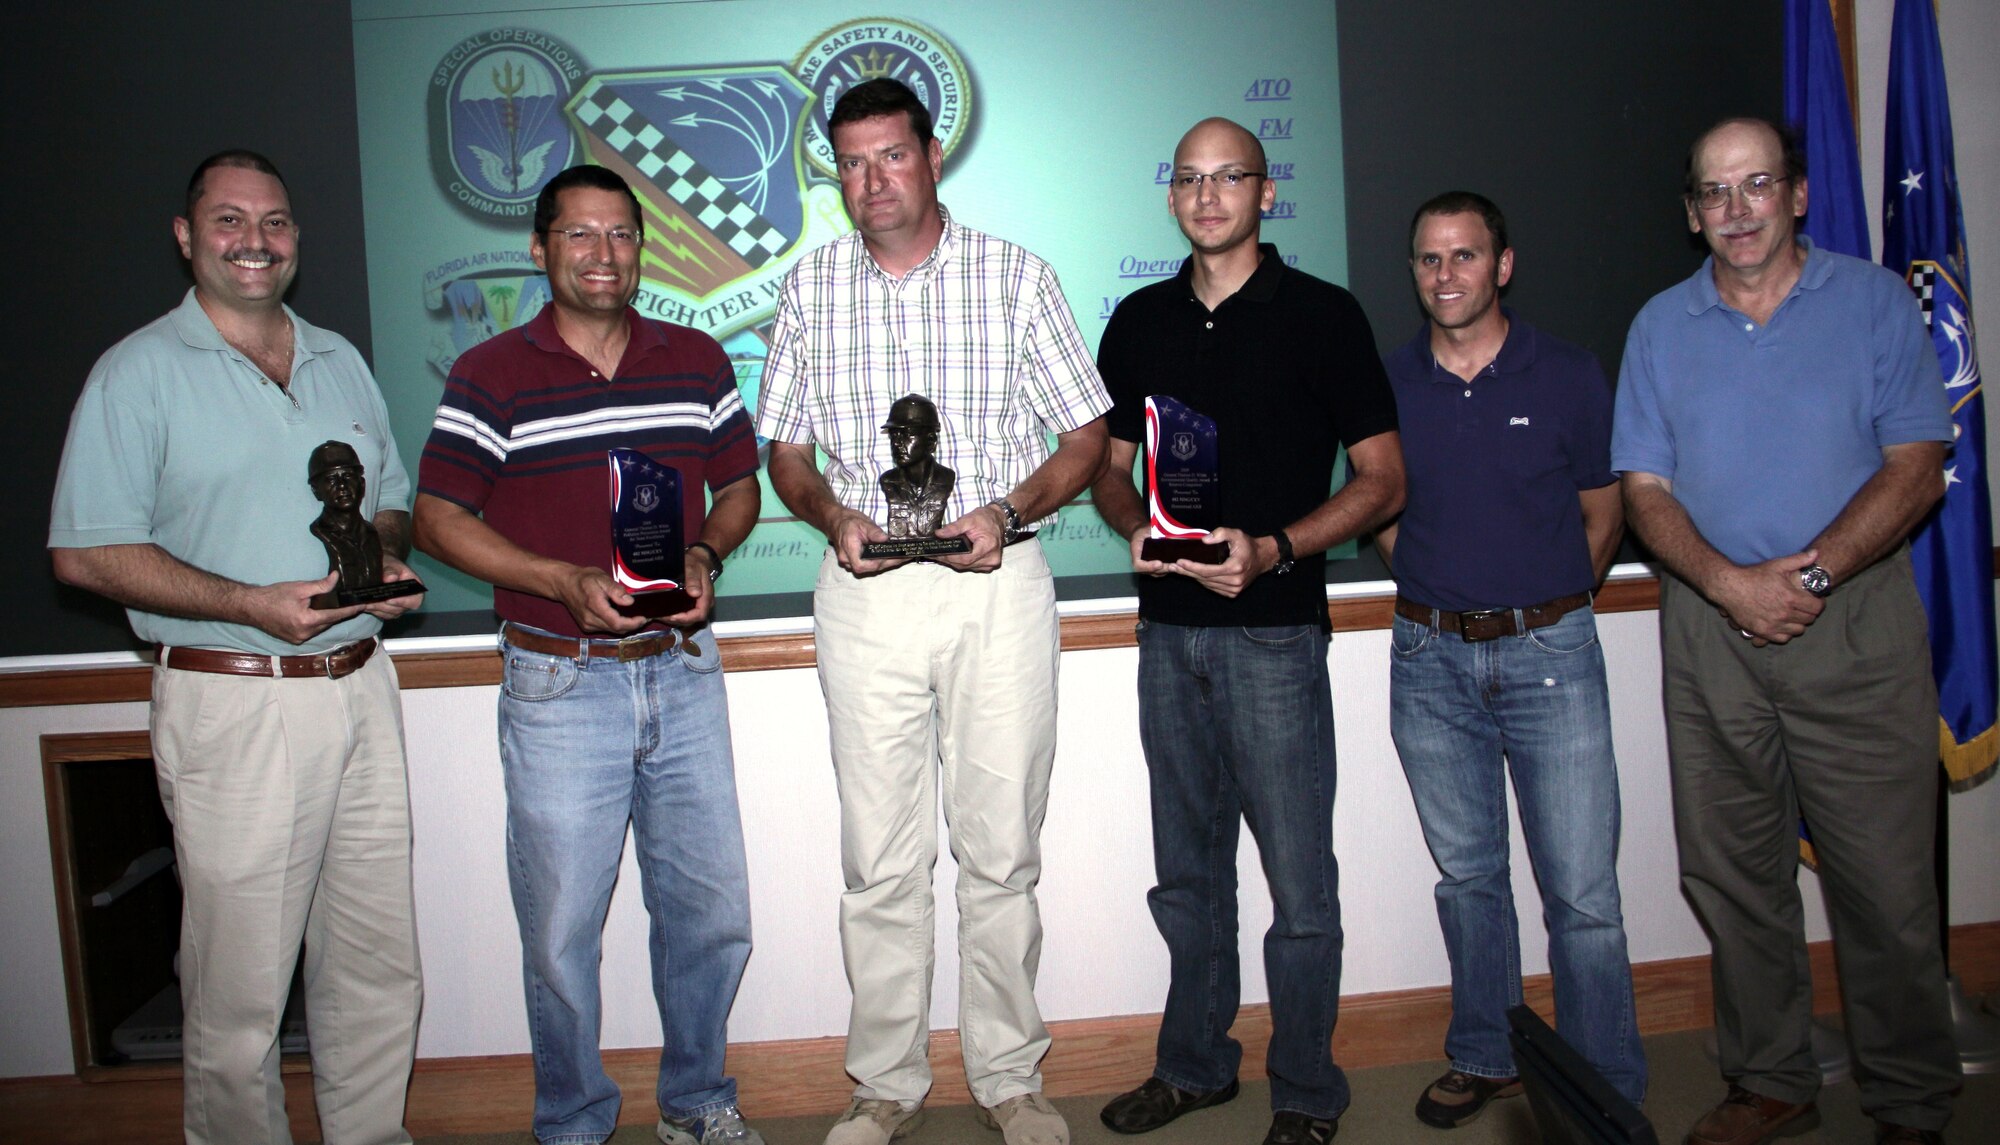 The 482nd Fighter Wing's environmental flight members recieve the 2009 General Thomas D. White Environmental Quality Award and General Thomas D. White Pollution Prevention Award for Team Excellence on May 5. Pictured from left, Larry Ventura, Tony Cedeno, Tim Driscoll, Roger Ramos, Robert Vespe and Mike Andrejko. (U.S. Air Force photo/Tim Norton)